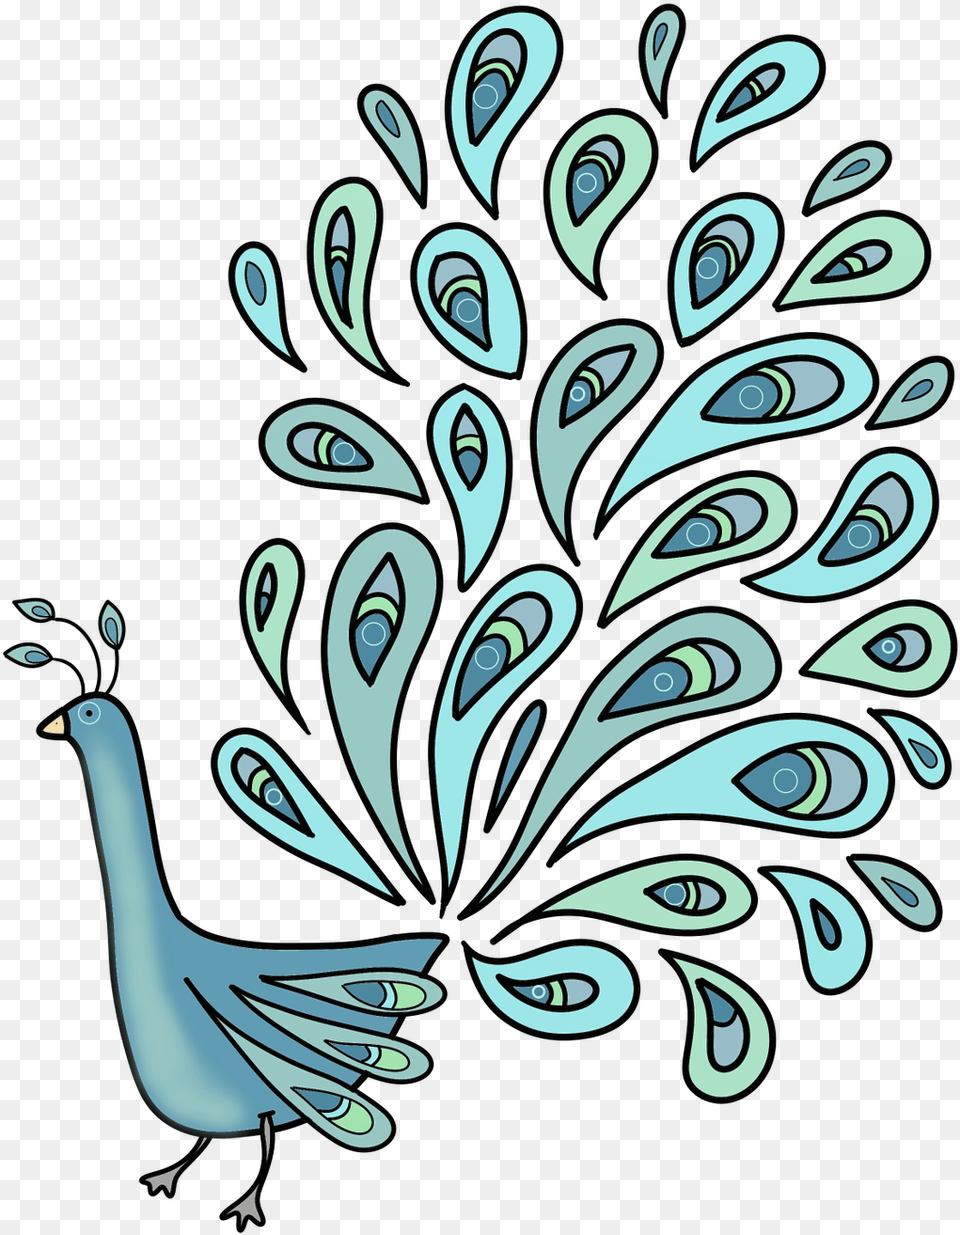 Single Peacock Feathers Peafowl Colouring, Art, Graphics, Floral Design, Pattern Png Image